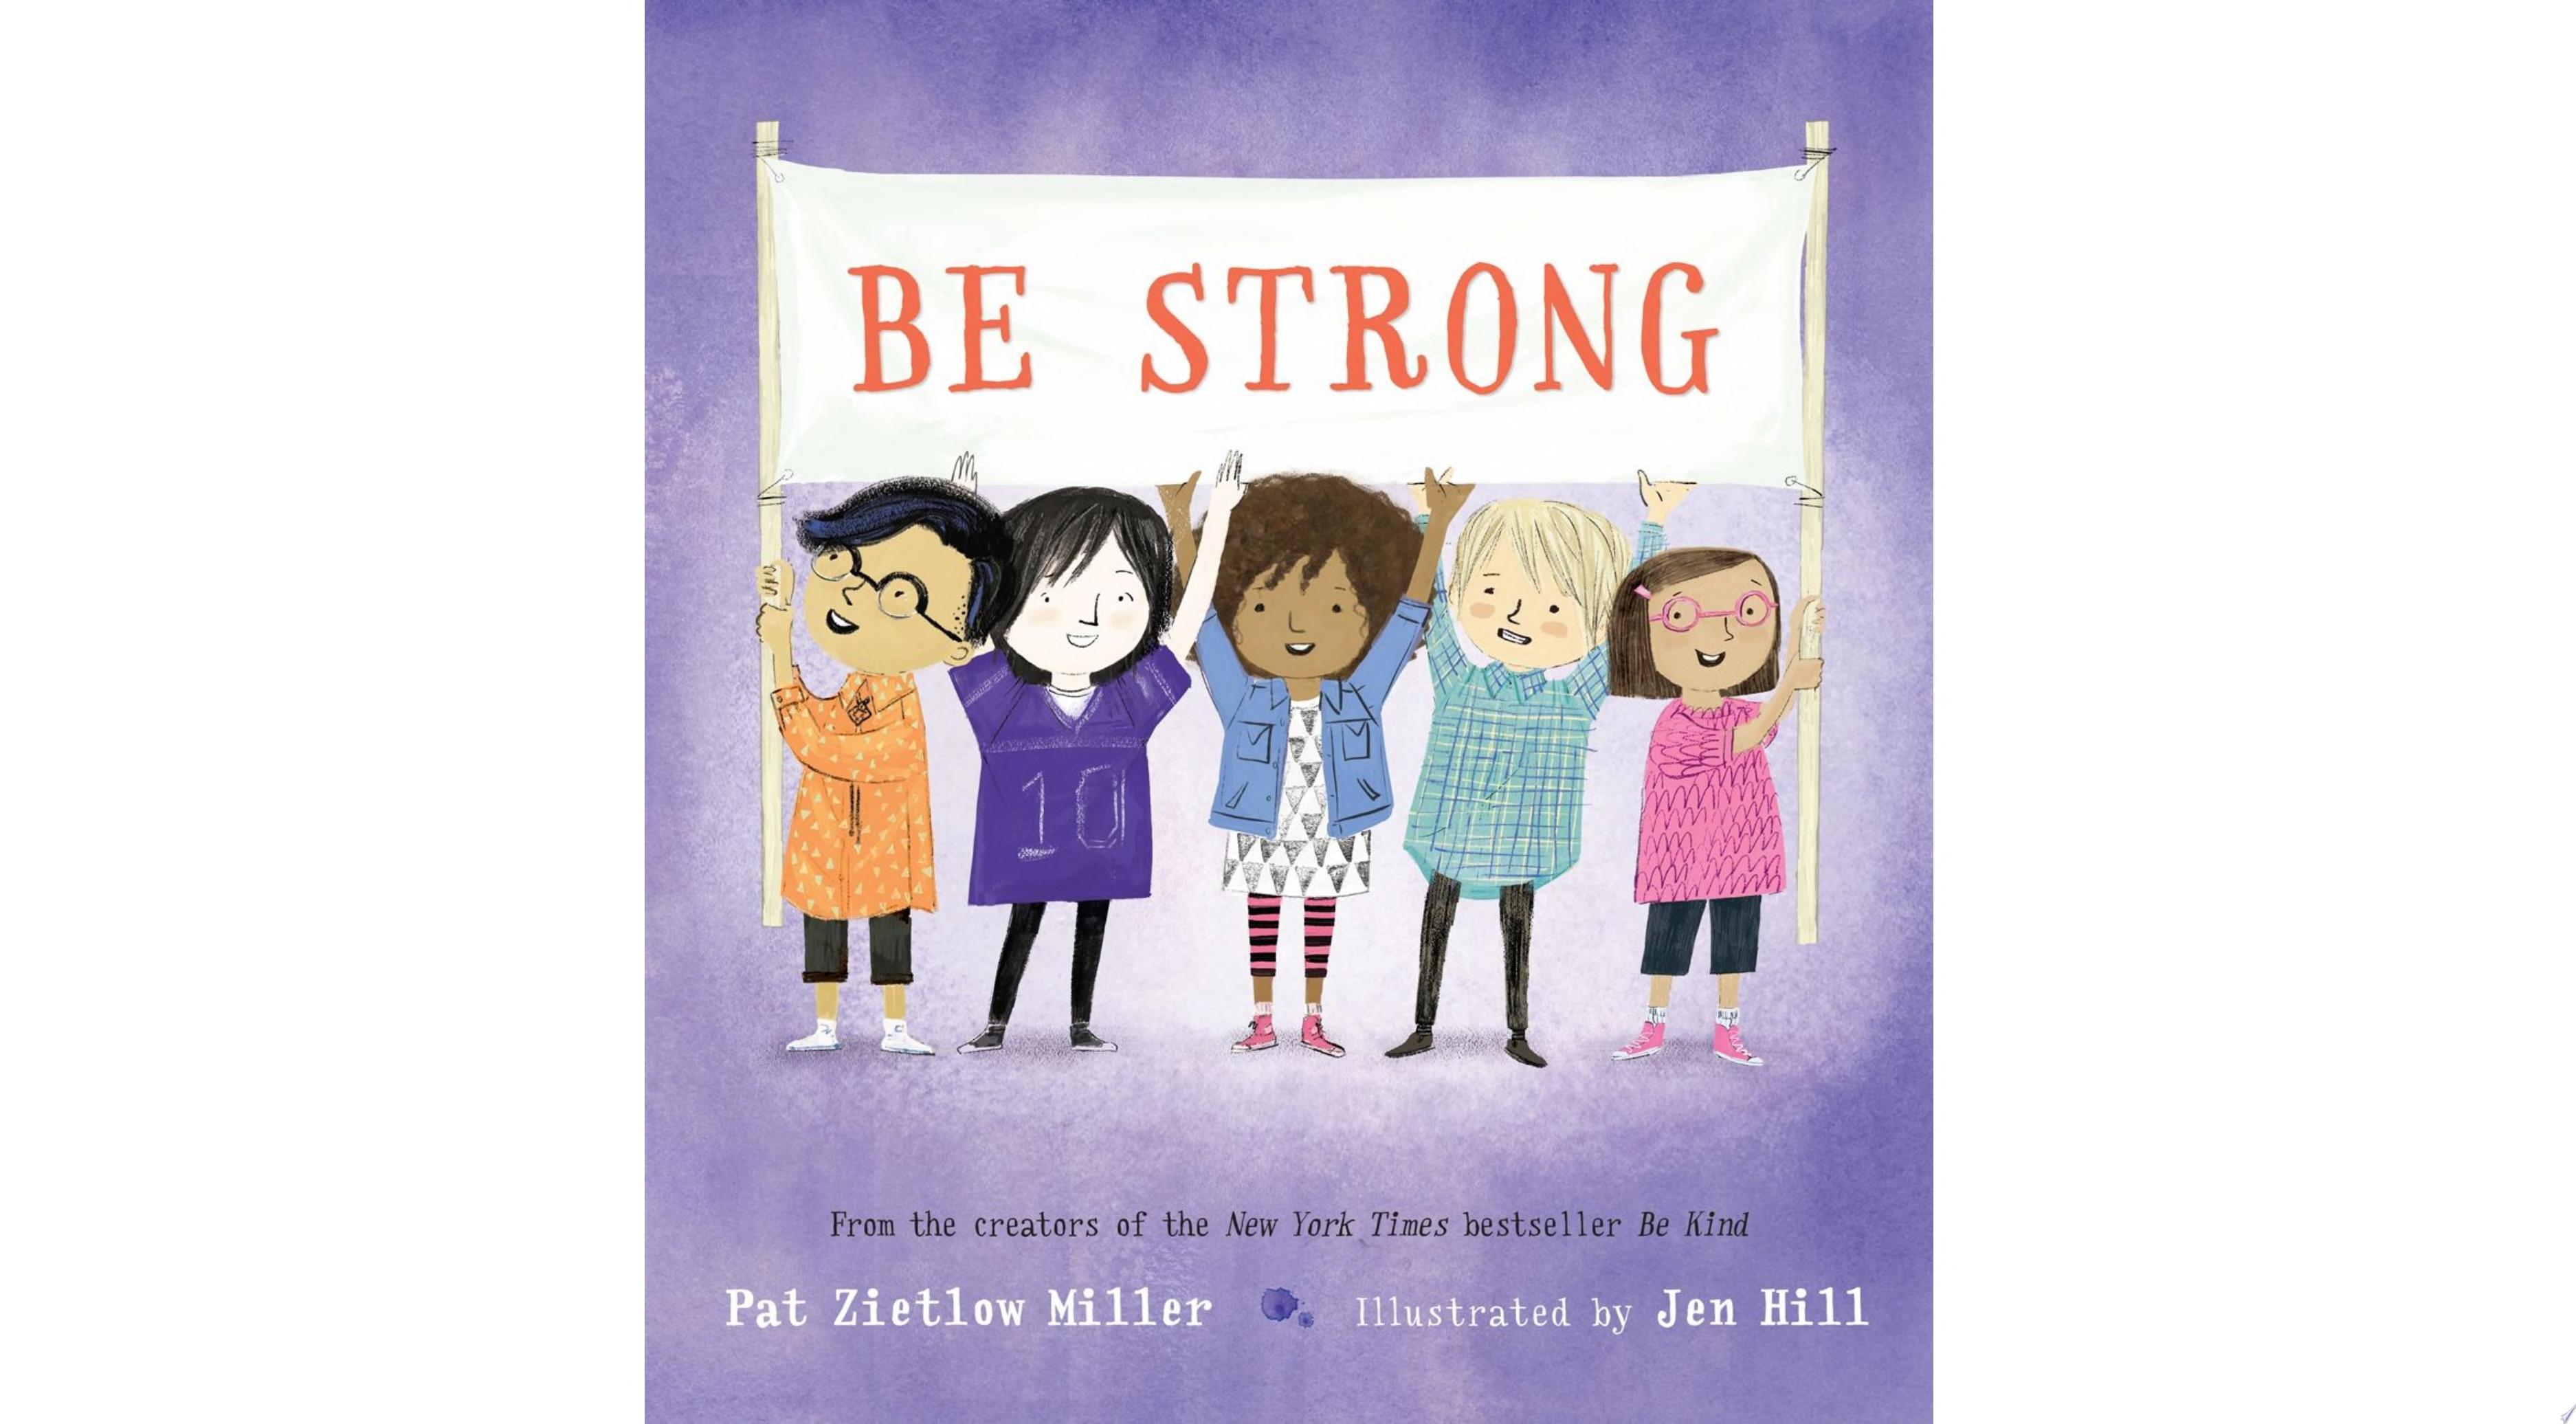 Image for "Be Strong"